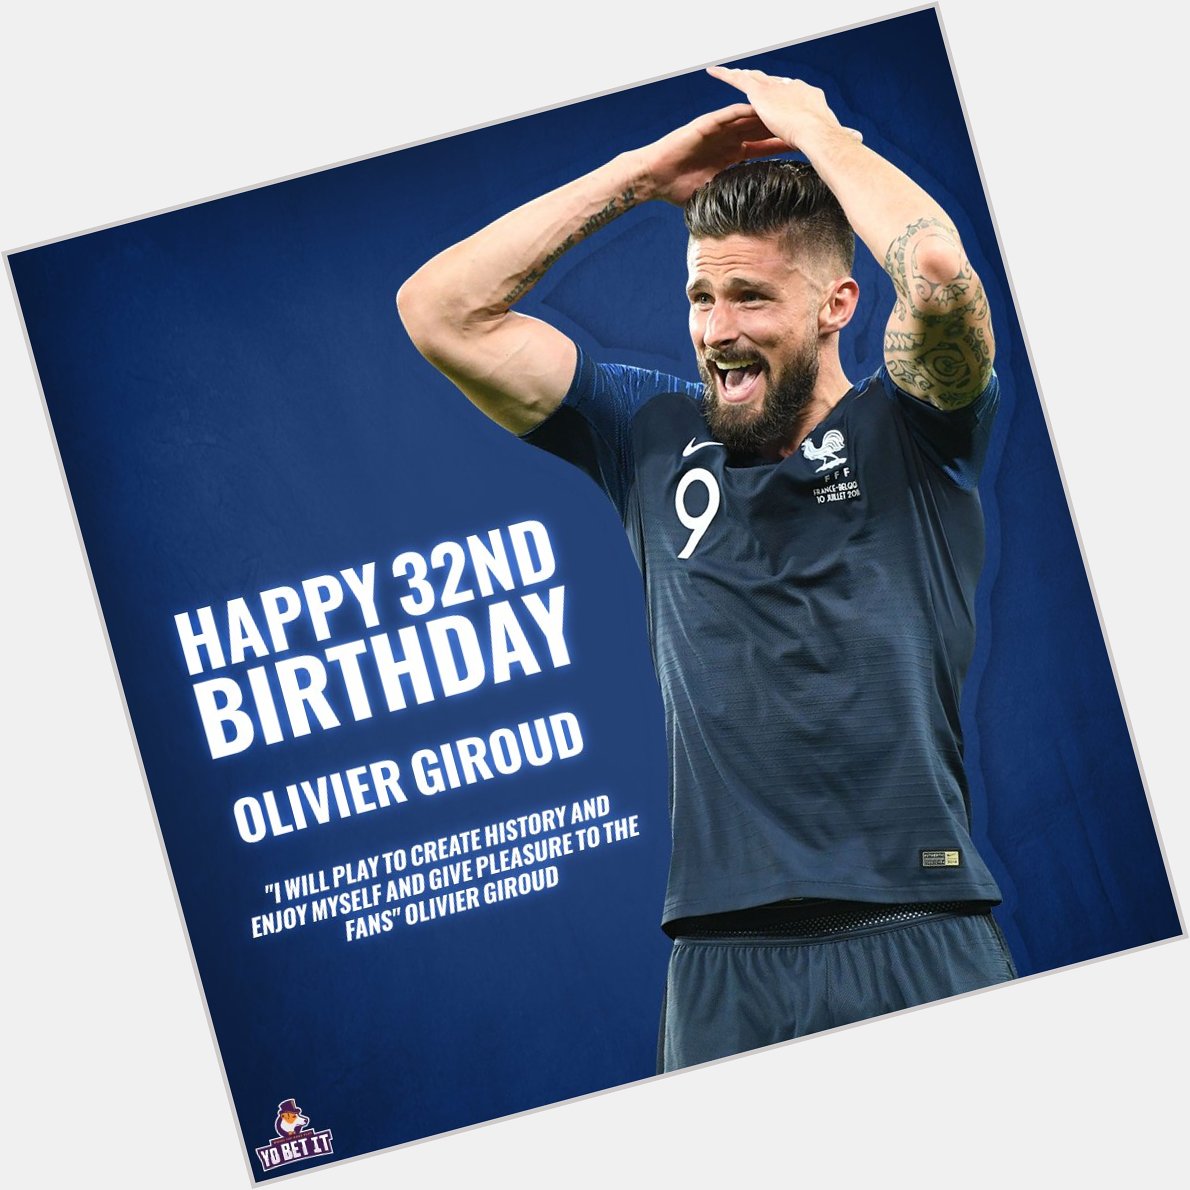  Happy 32nd Birthday to Chelsea\s Centre-Forward Olivier Giroud     